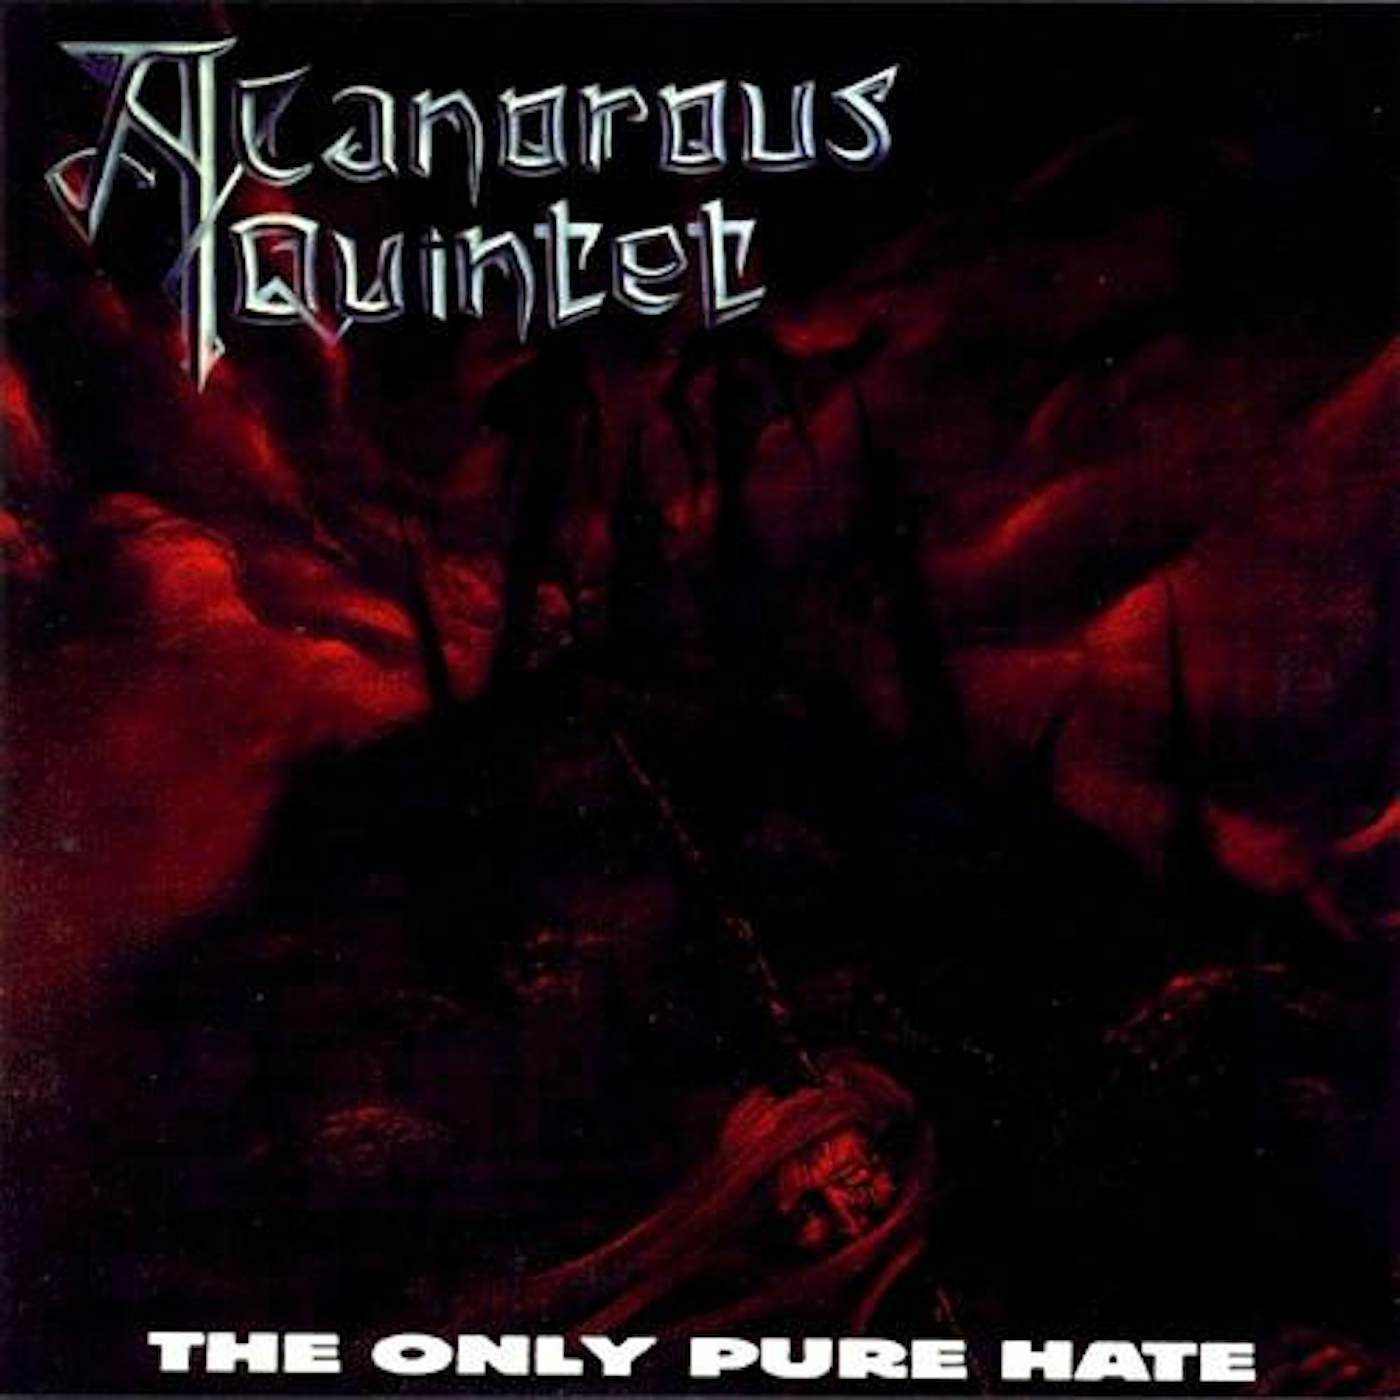 A Canorous Quintet Only Pure Hate Vinyl Record